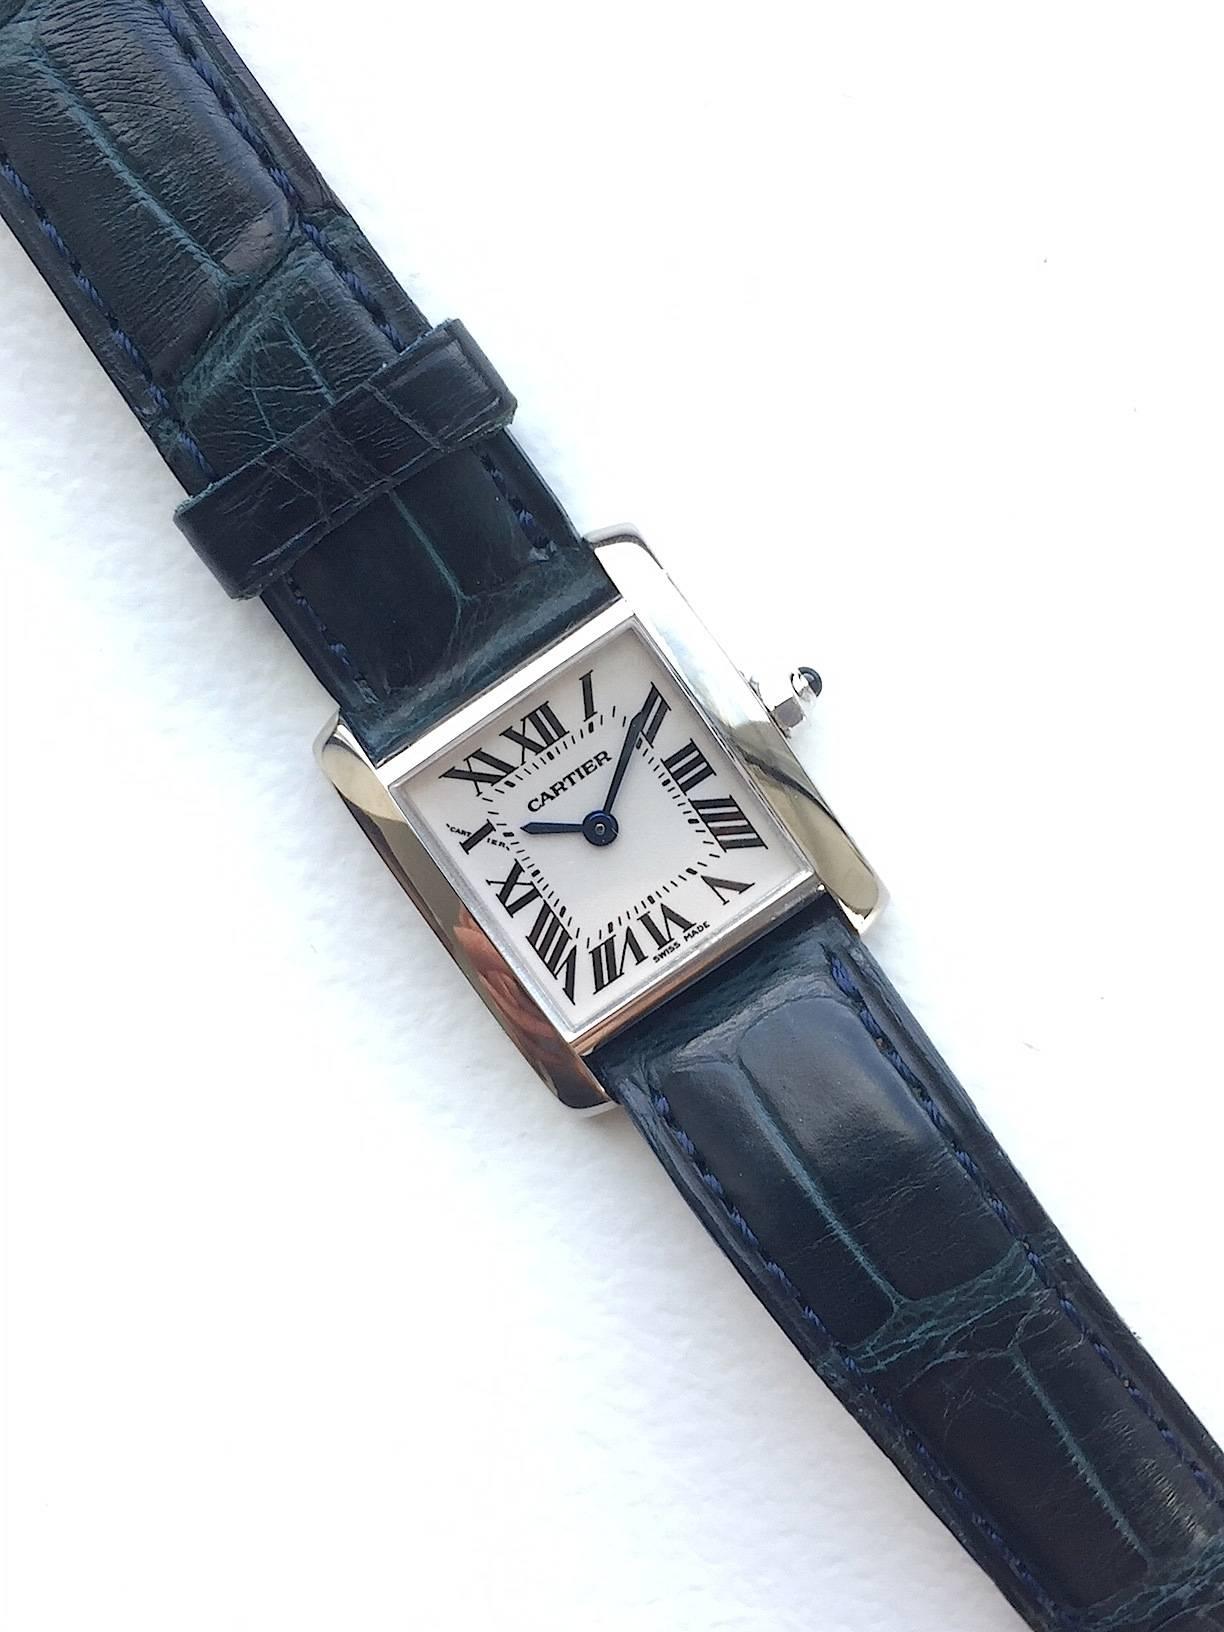 Cartier 18K White Gold Ladies Tank Quartz Watch
Classic Cartier Tank Design with Roman Numeral Markers 
White Colored Dial with Cartier Blue Hands 
22mm x 22mm Case 
Cartier Cabochon Crown 
Sapphire Crystal 
Quartz Movement 
Comes Fitted on A